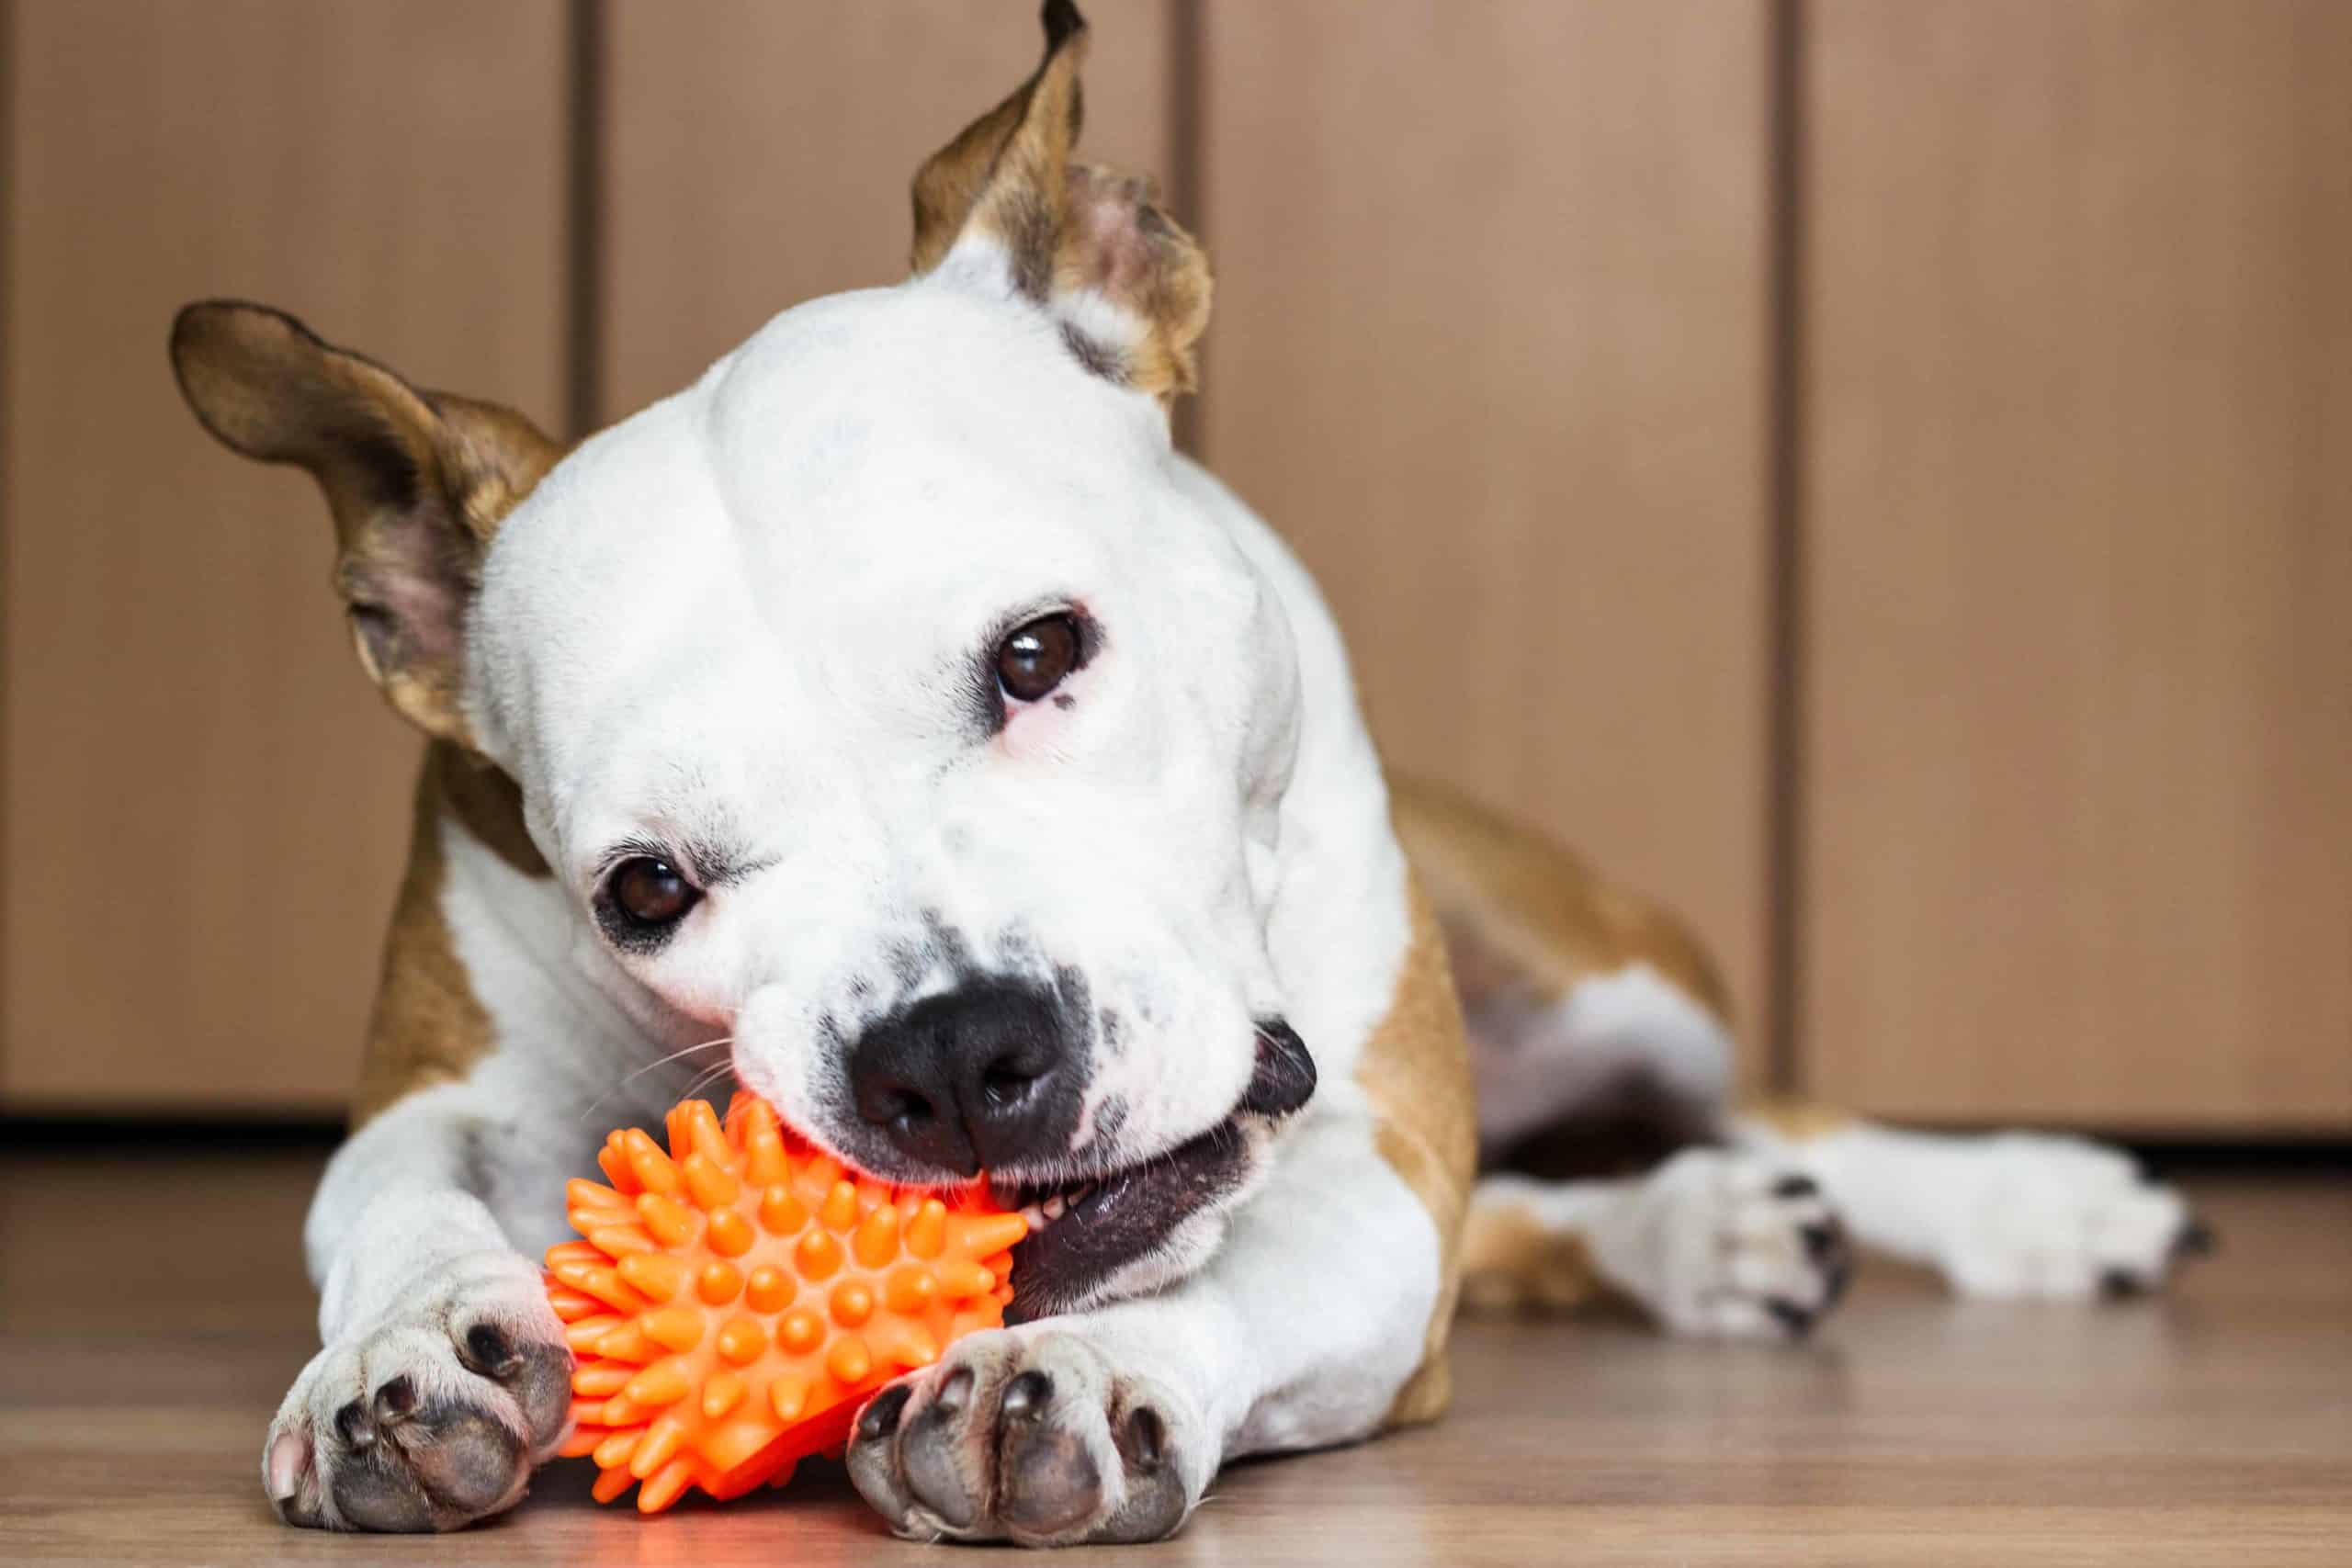 Dog chews on plastic toy. Getting your dog toys made from recycled plastic goes a long way in minimizing plastic waste that ends up in landfills or oceans. 